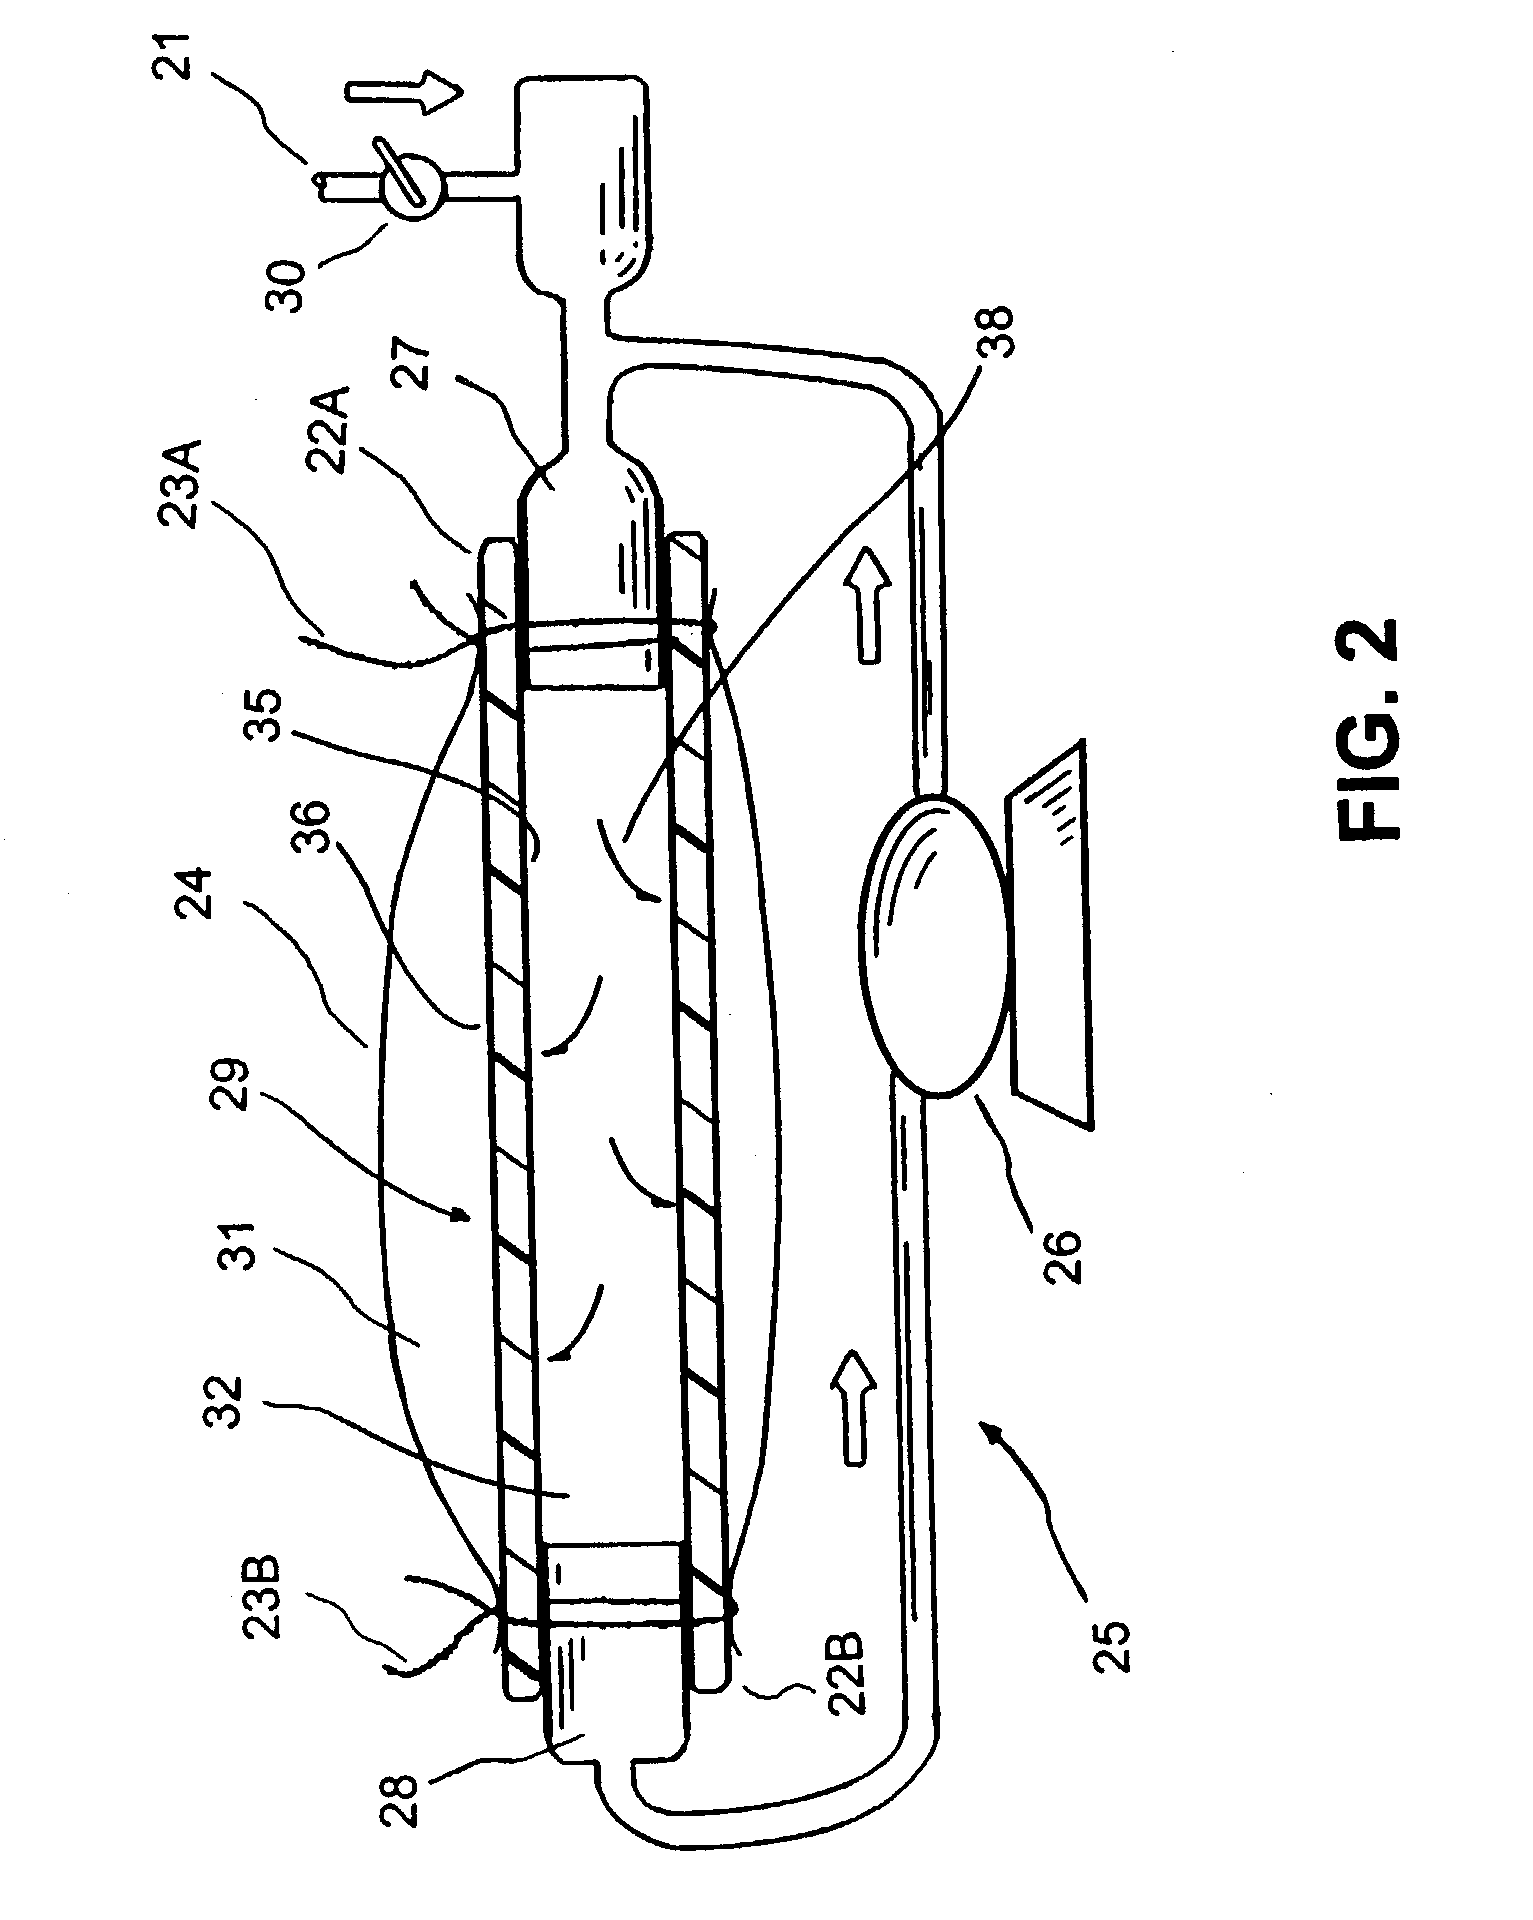 Device for treating diabetes and methods thereof